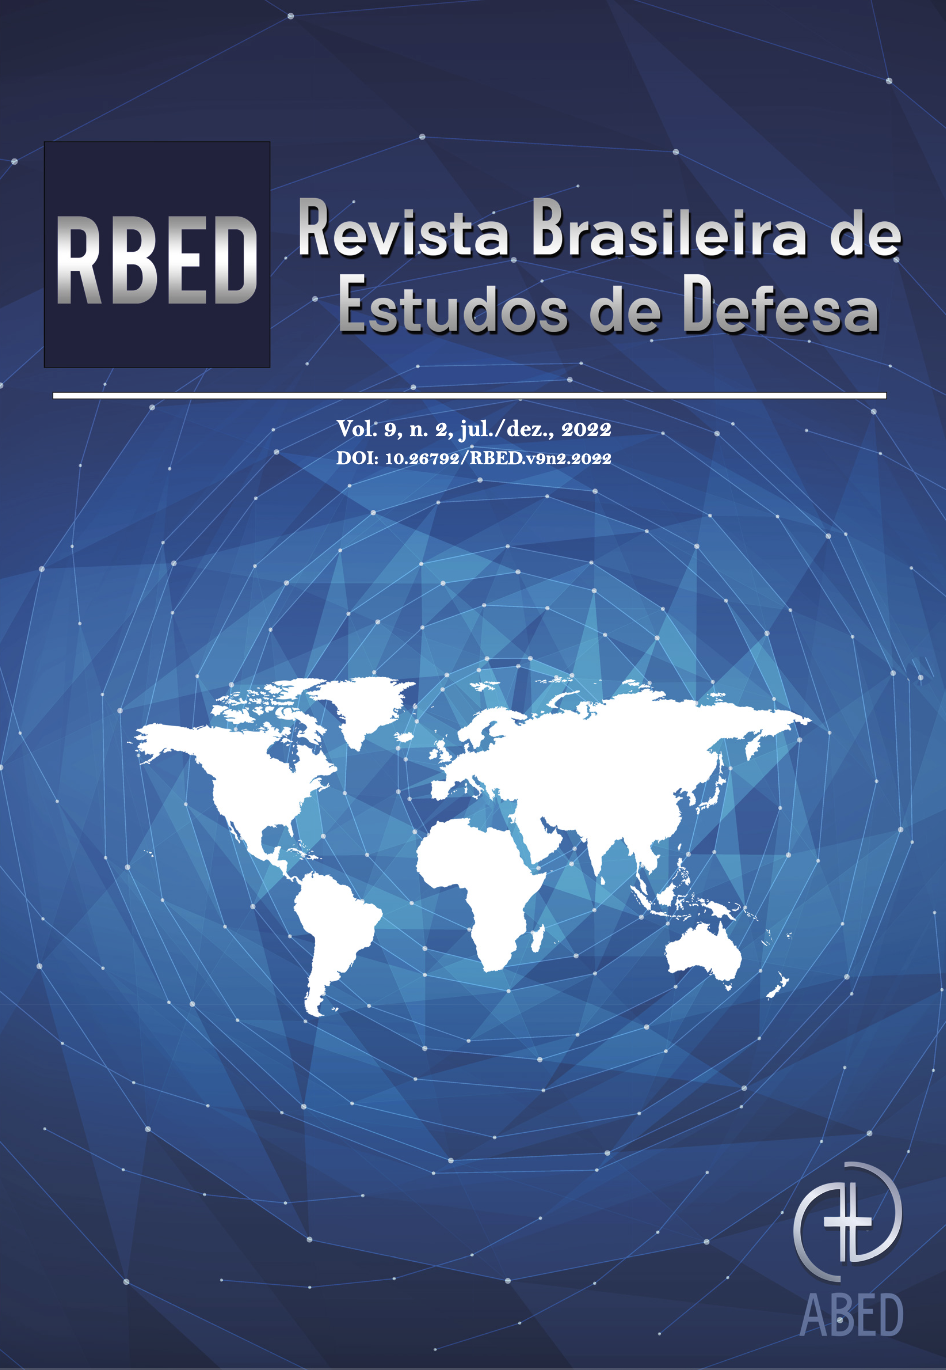 Structural Analysis of Cybersecurity Strategies of Brazil and the United States